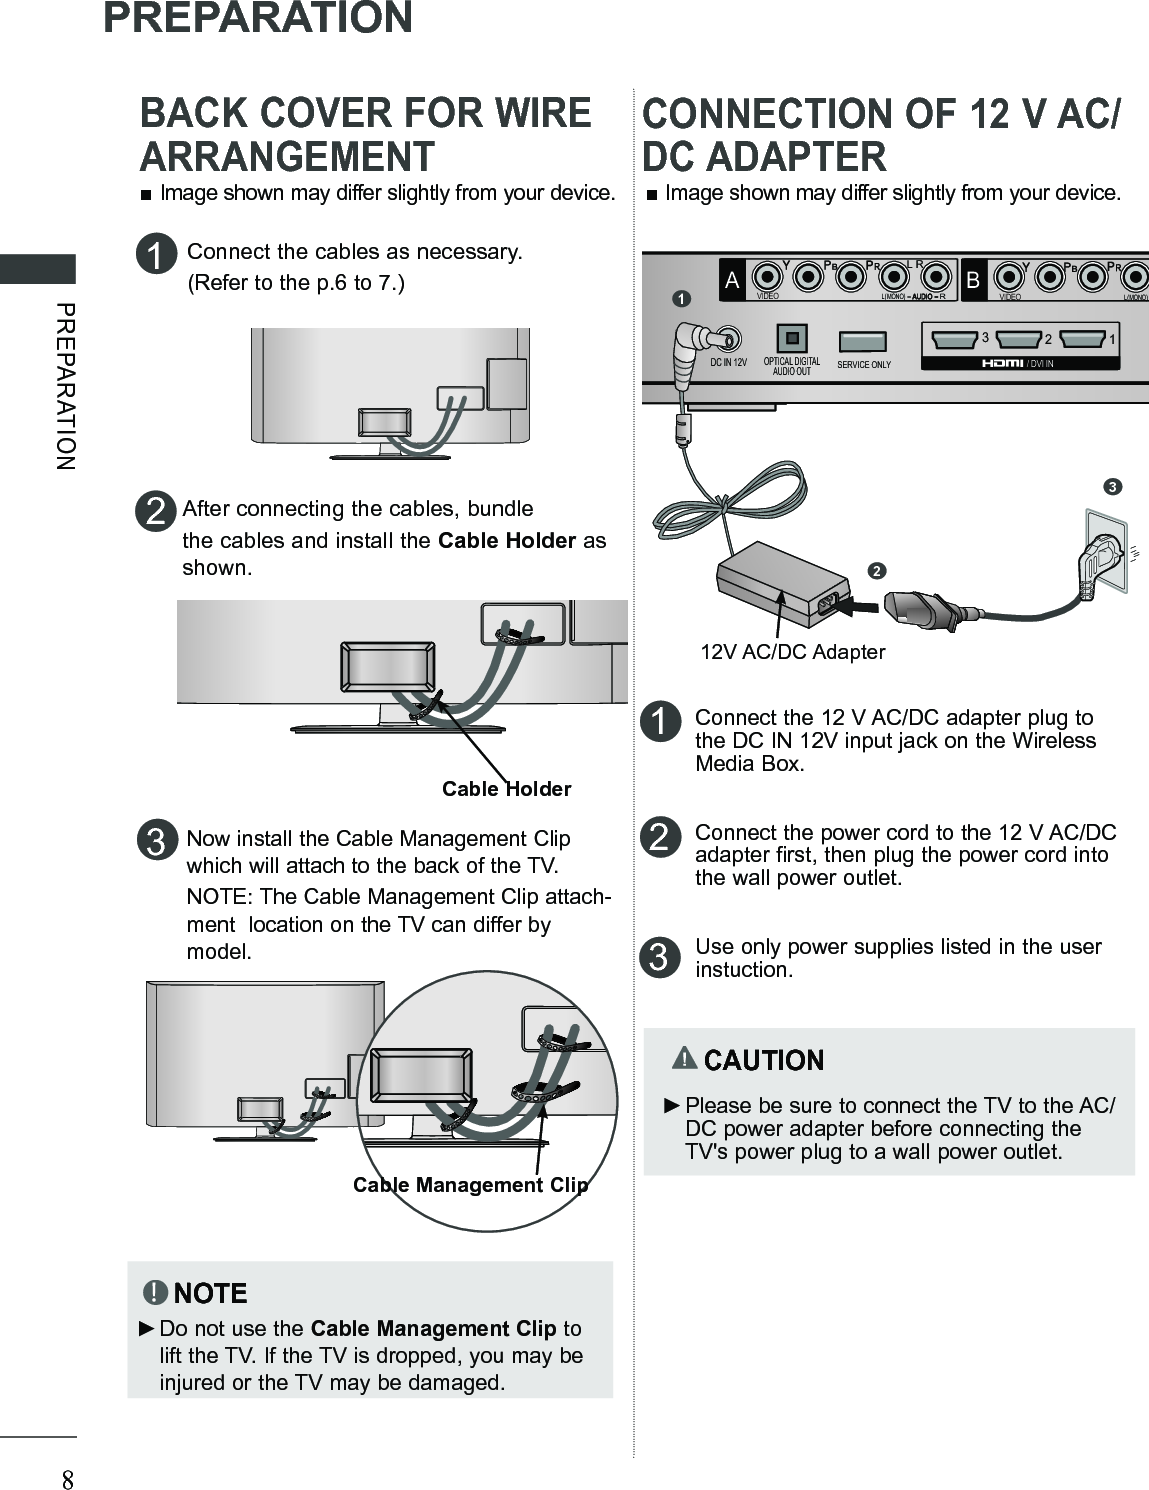 8PREPARATIONPREPARATION■ Image shown may differ slightly from your device.3Now install the Cable Management Clip which will attach to the back of the TV.NOTE: The Cable Management Clip attach-ment  location on the TV can differ by model.NOTE ►Do not use the Cable Management Clip to lift the TV. If the TV is dropped, you may be injured or the TV may be damaged.Connect the cables as necessary.(Refer to the p.6 to 7.)1After connecting the cables, bundlethe cables and install the Cable Holder as shown.2Cable HolderCable Management ClipARL(MONO)AUDIOVIDEOB12SERVICE ONLY3RGB IN (PC)AUDIO INRGB/DVISERVICE ONLYIR BLASTERABCOMPONENT / AV IN 1COMPONENT / AV IN 2RL(MONO)AUDIOVIDEOOPTICAL DIGITALAUDIO OUTDC IN 12VLRLR  / DVI IN12123Connect the 12 V AC/DC adapter plug to the DC IN 12V input jack on the Wireless Media Box. Connect the power cord to the 12 V AC/DC adapter first, then plug the power cord into the wall power outlet.Use only power supplies listed in the user instuction.  CAUTION ►Please be sure to connect the TV to the AC/DC power adapter before connecting the TV&apos;s power plug to a wall power outlet.■ Image shown may differ slightly from your device.312V AC/DC AdapterBACK COVER FOR WIRE ARRANGEMENTCONNECTION OF 12 V AC/DC ADAPTER